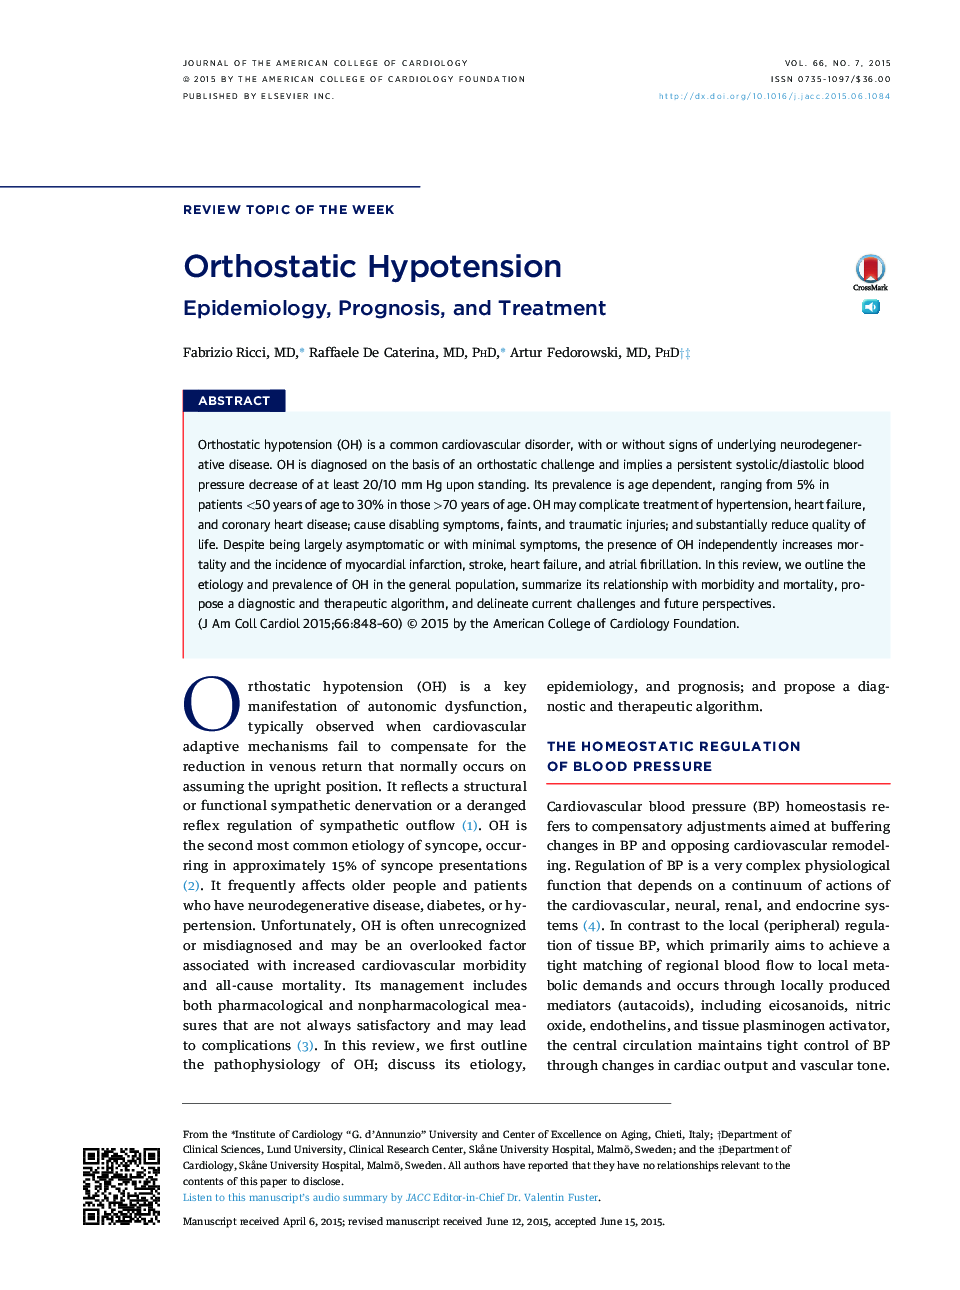 Orthostatic Hypotension: Epidemiology, Prognosis, and Treatment